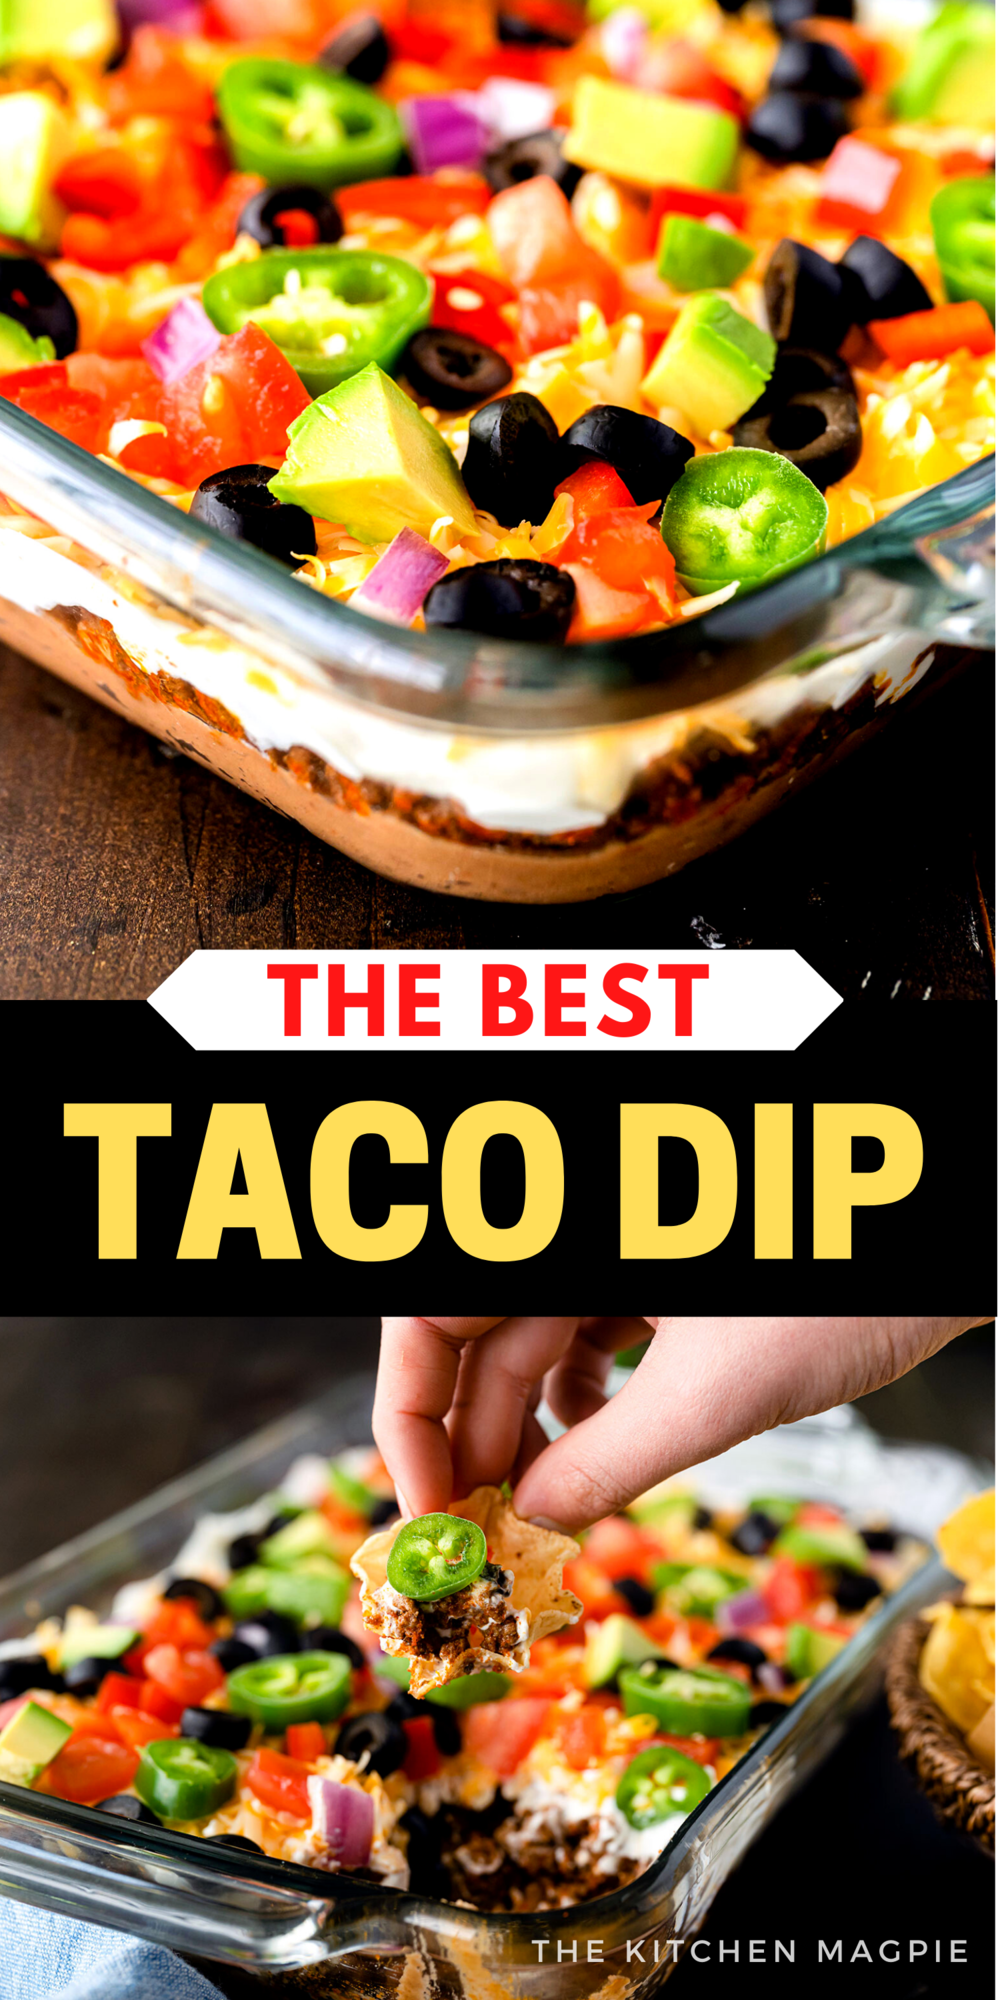 Taco dip with layers of real taco meat, sour cream, refried beans, cheese, tomatoes, olives, avocado and more! This is the ultimate taco dip!